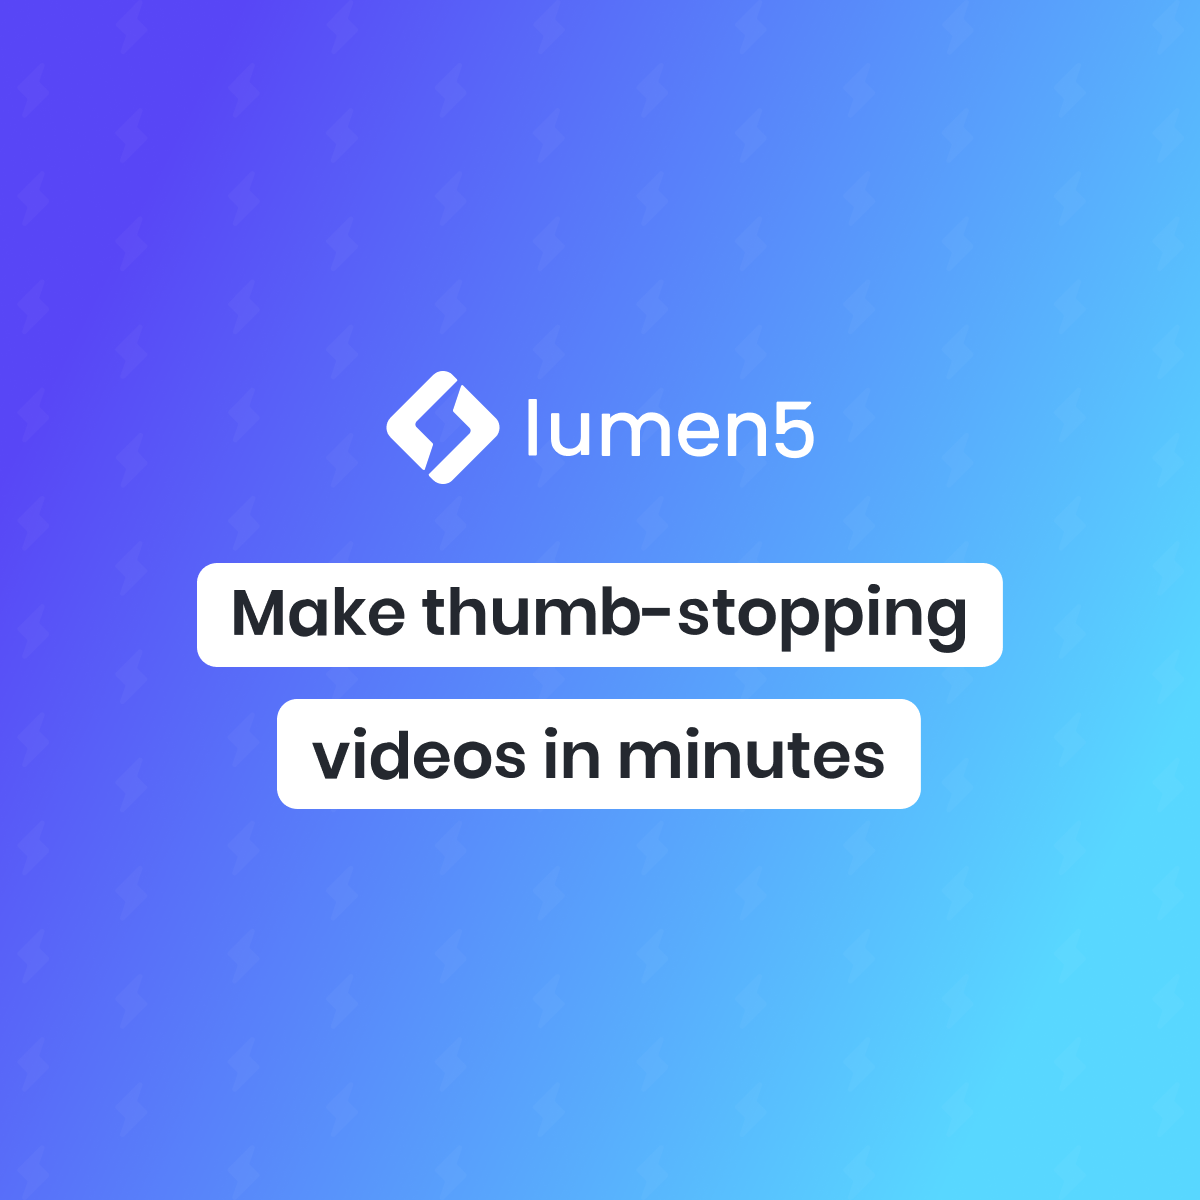 Social video marketing made easy. A video maker that turns text into video marketing content in minutes.